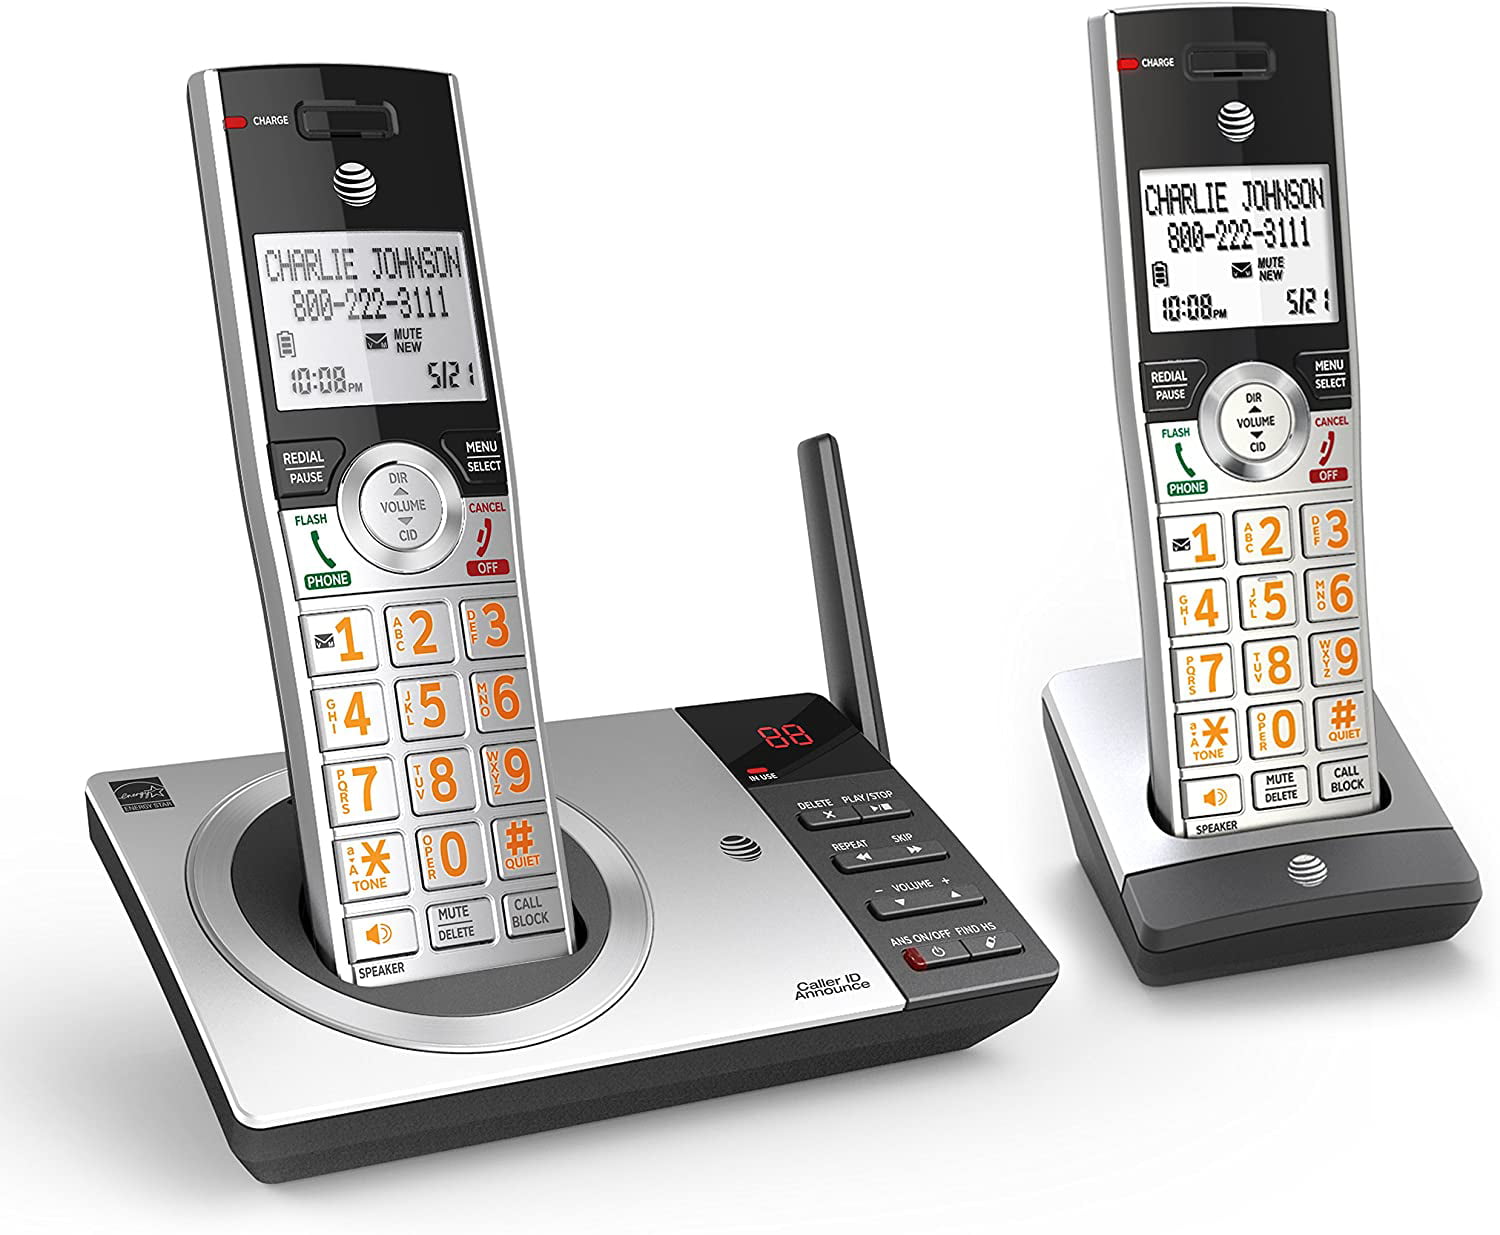 Silver/Black with 2 Handset AT&T CL82207 DECT 6.0 Expandable Cordless Phone with Answering System & Smart Call Blocker 